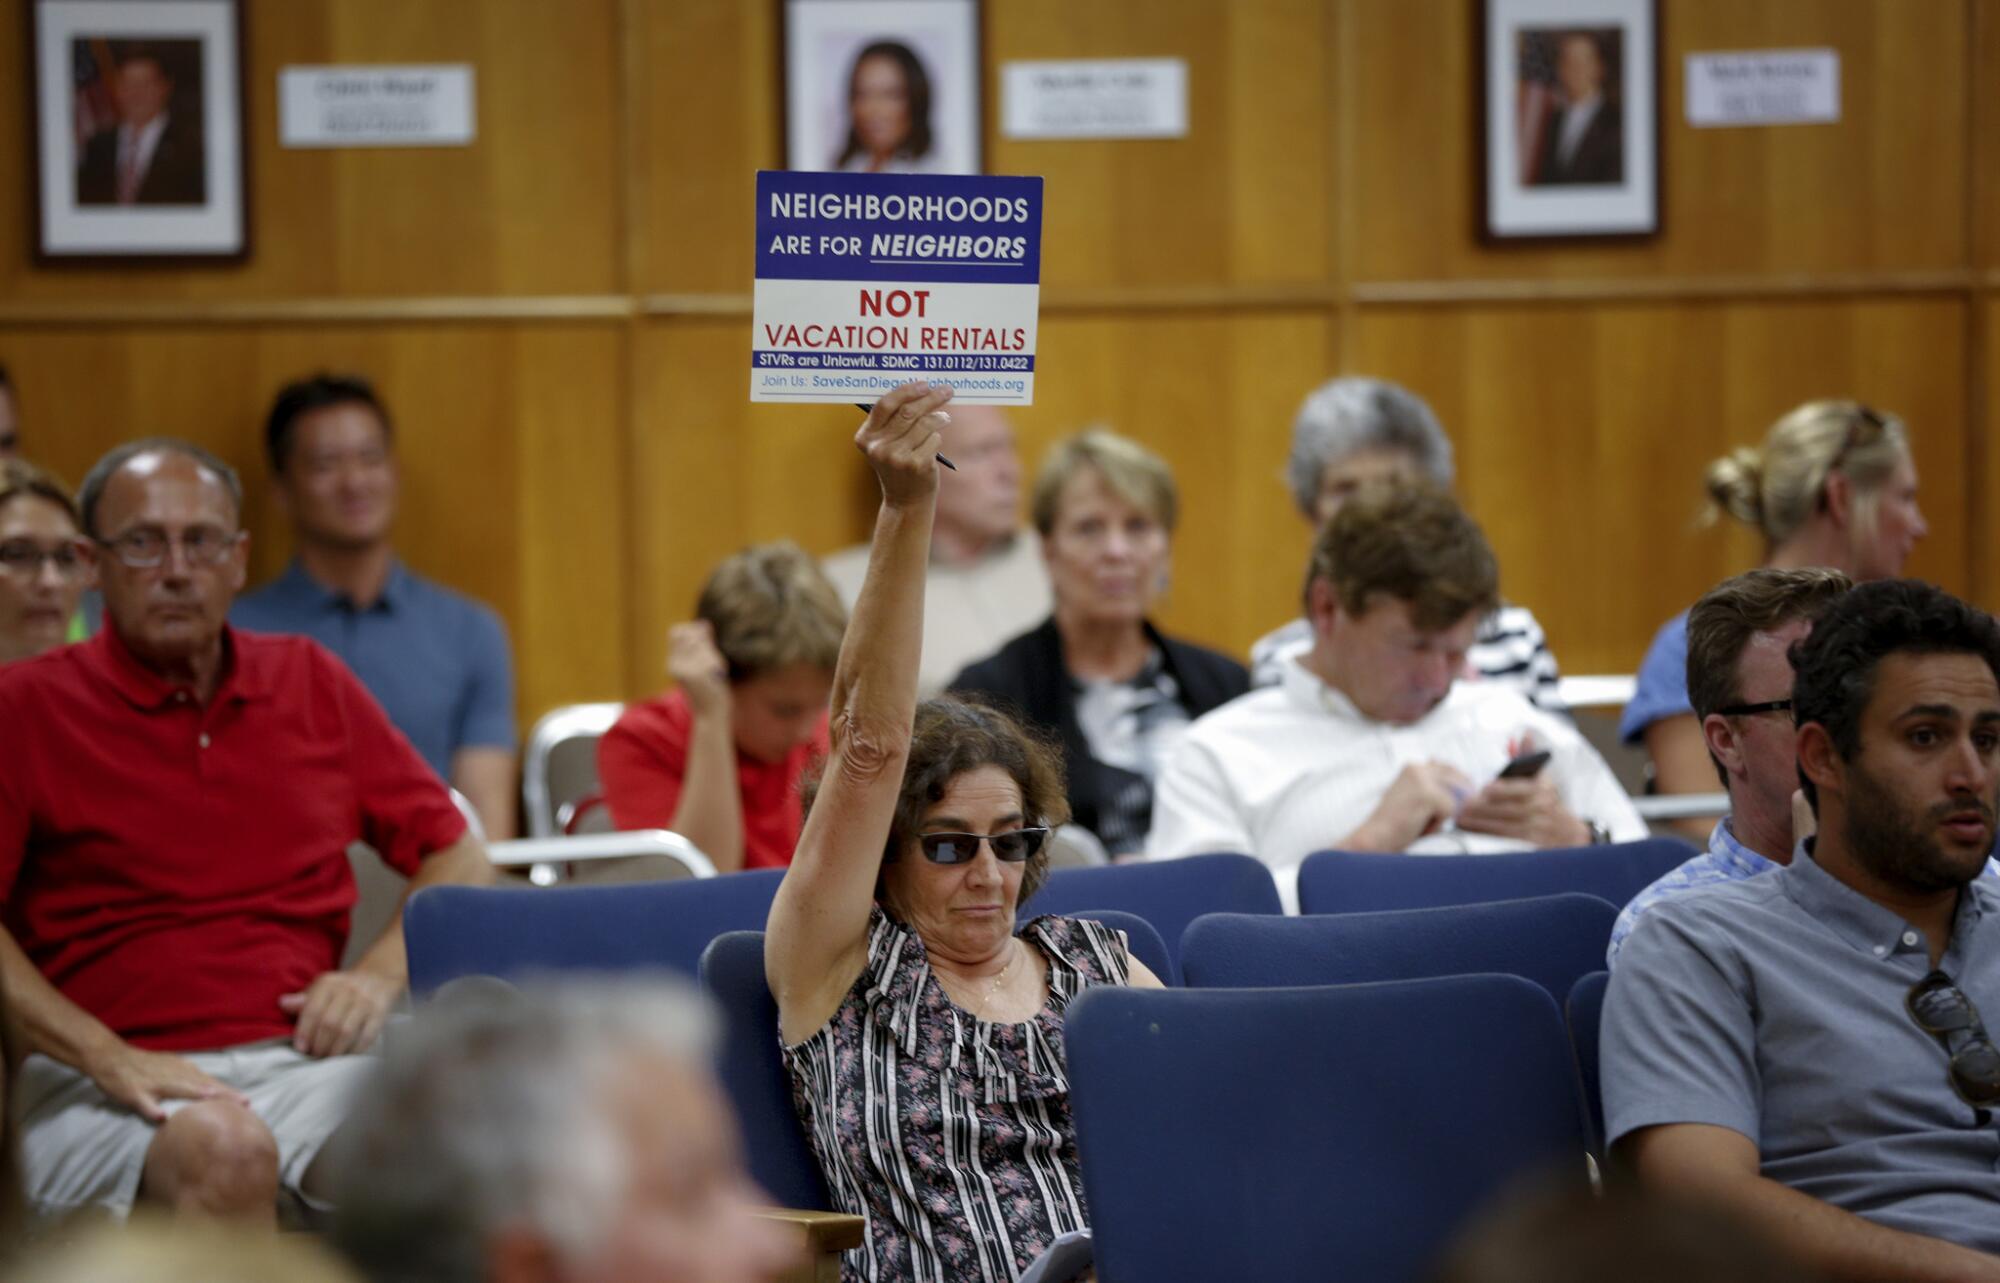 Dawn Sassi from University Heights, waved her sign showing her opposition for vacation rentals in San Diego.